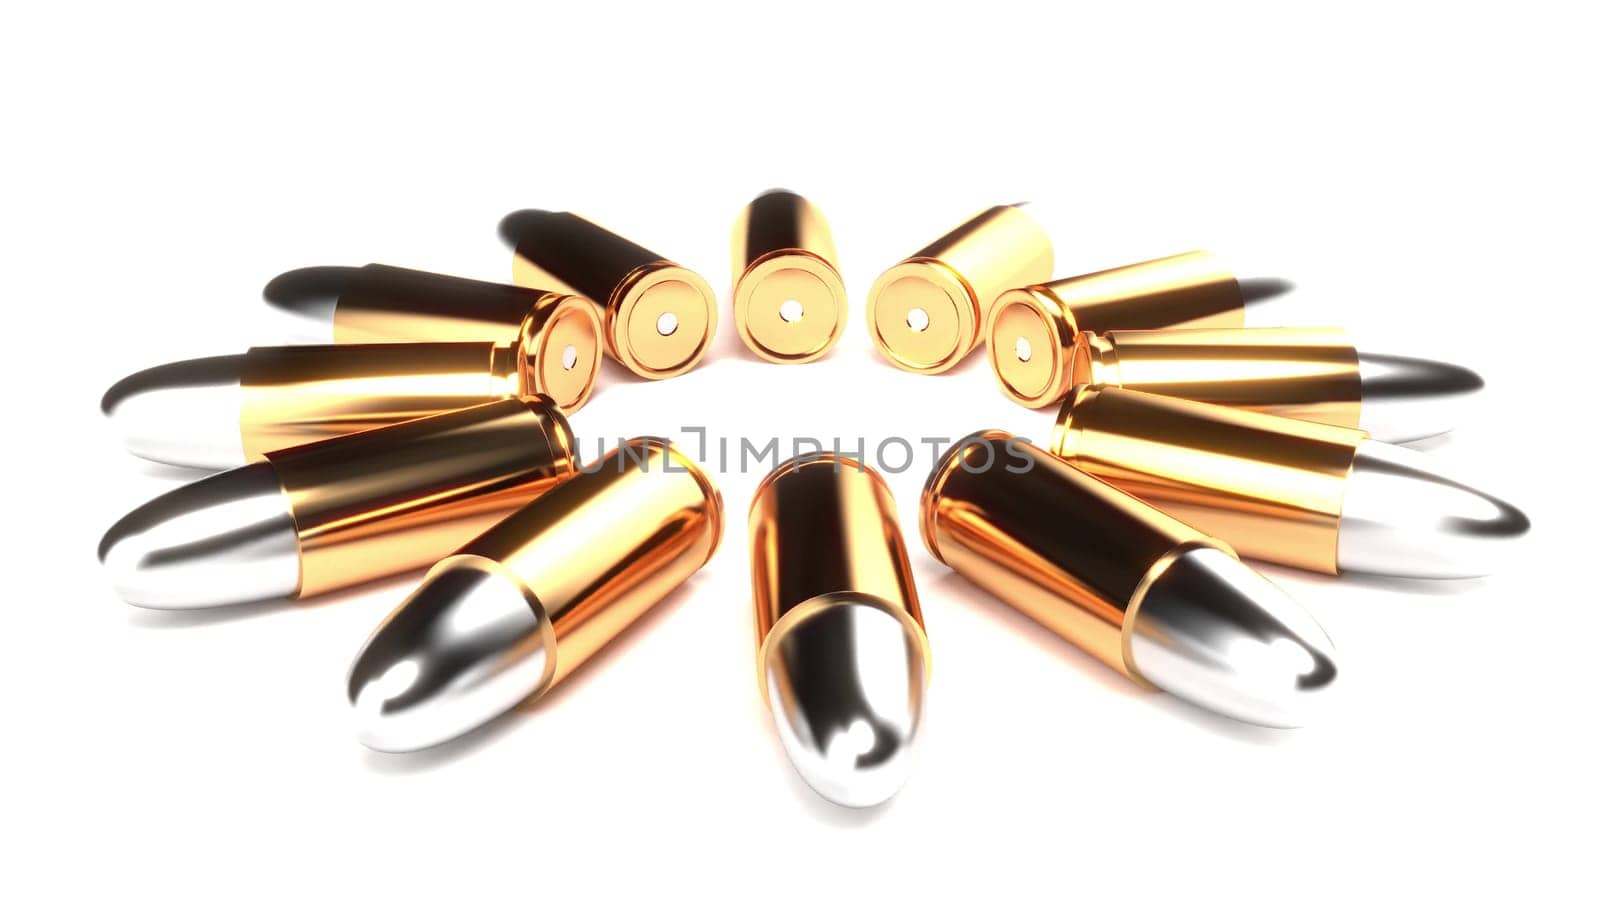 Bullets round move on circle on white surface 3d render by Zozulinskyi